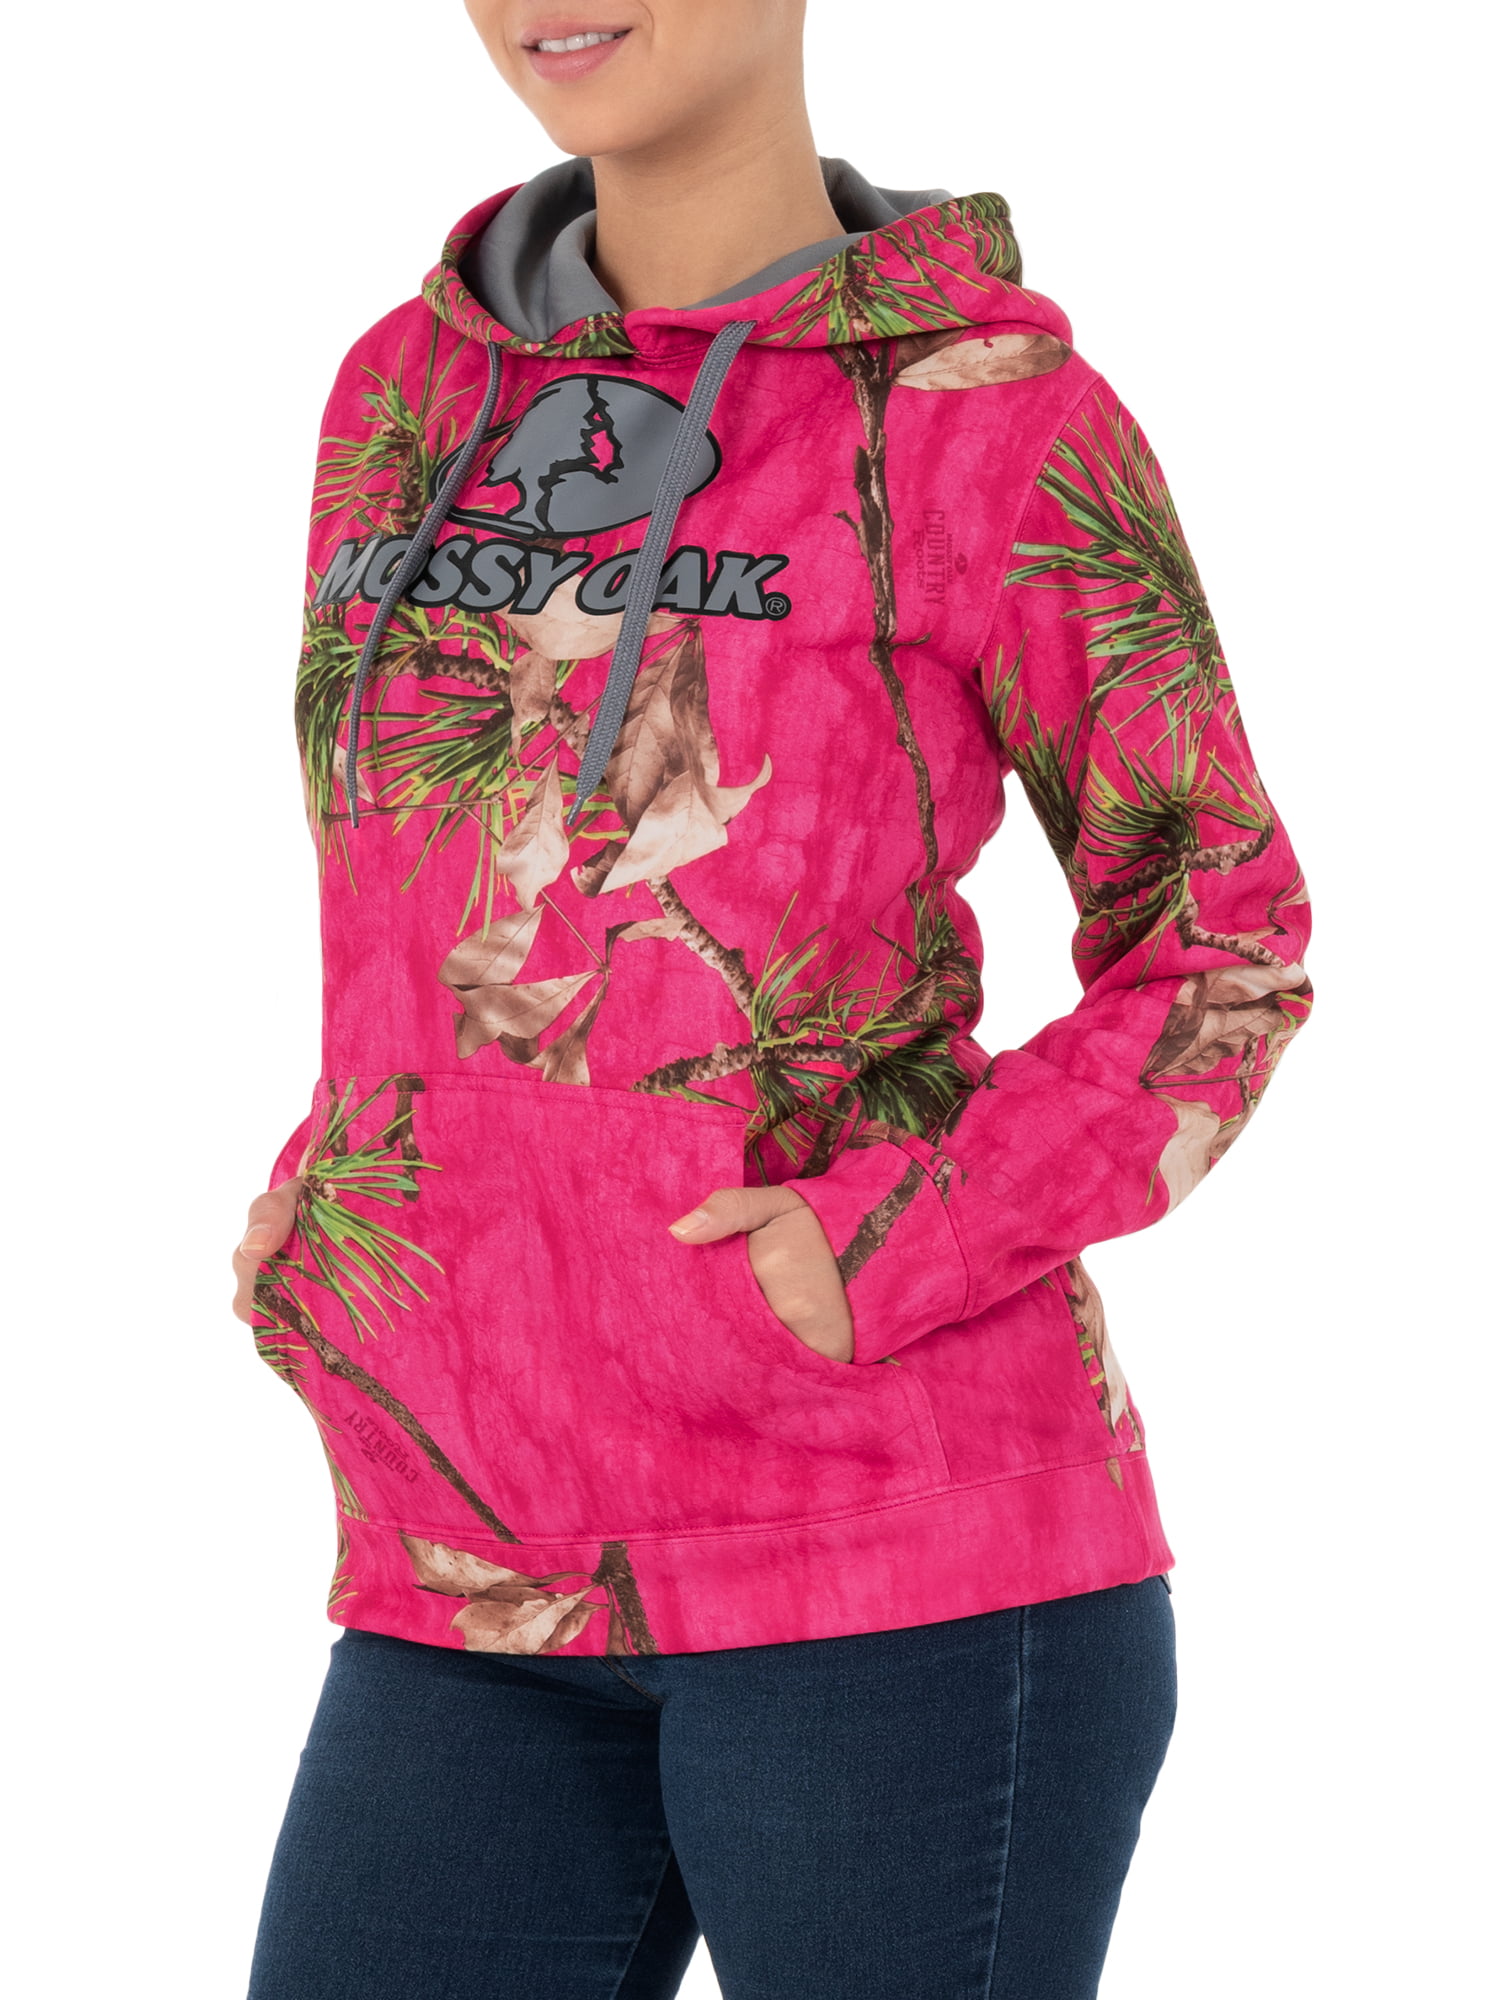 mossy oak pink hoodie for Sale,Up To OFF 77%